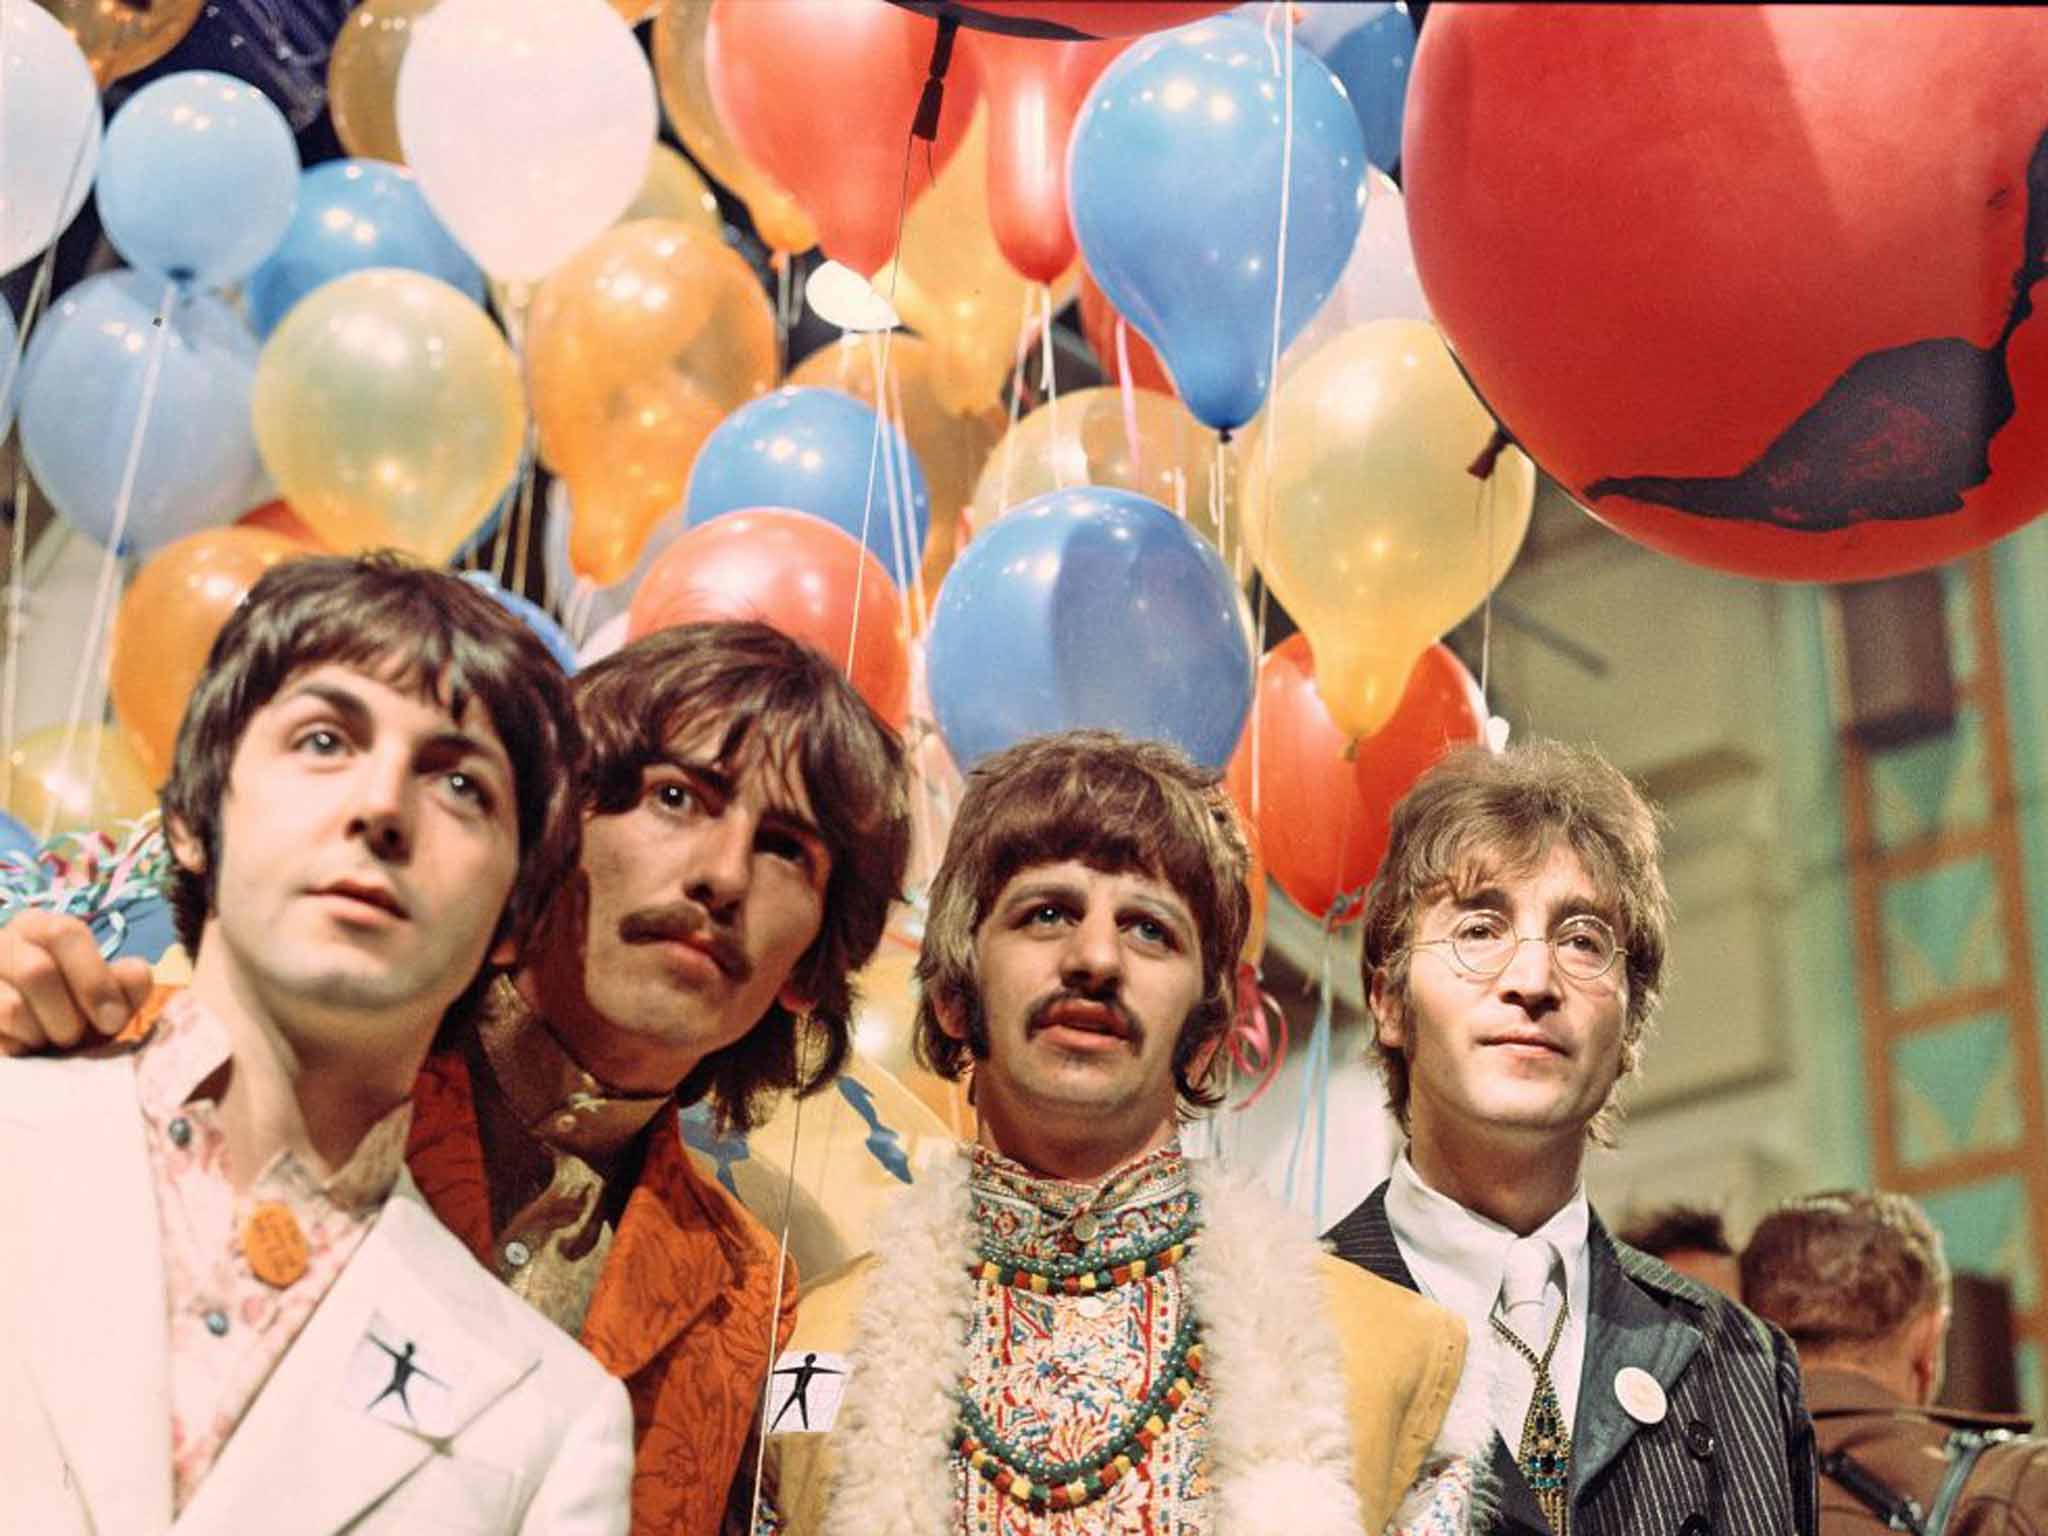 The furious four: The Beatles in 1967